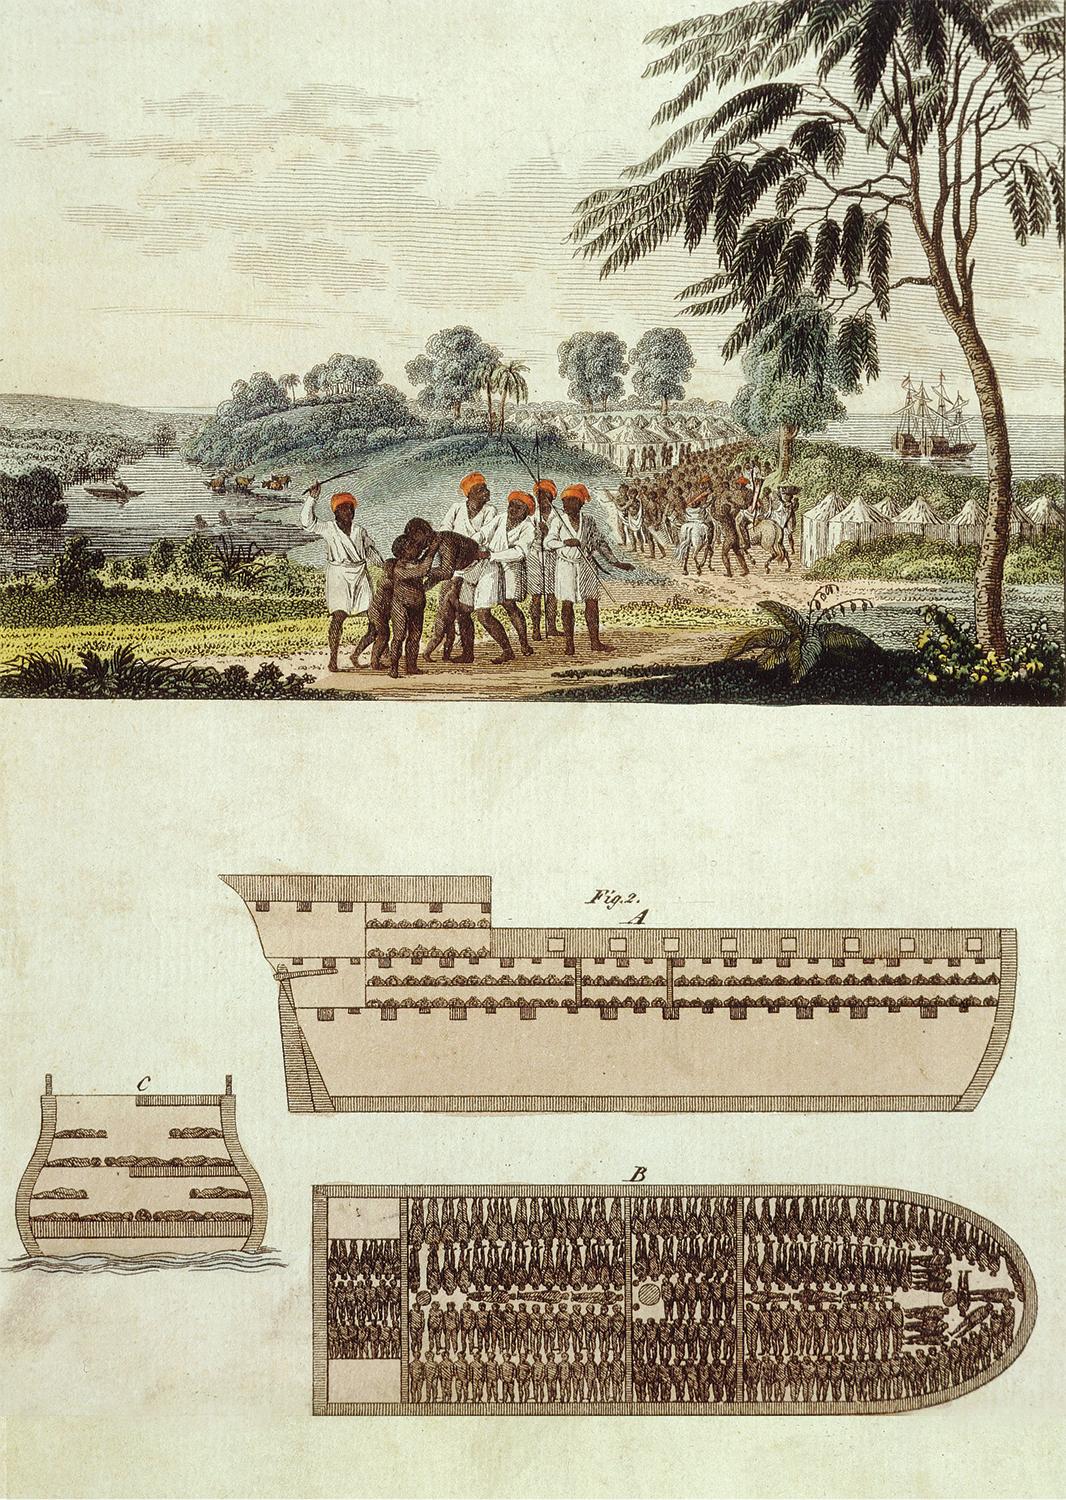 Colored engraving of layout of a slave ship